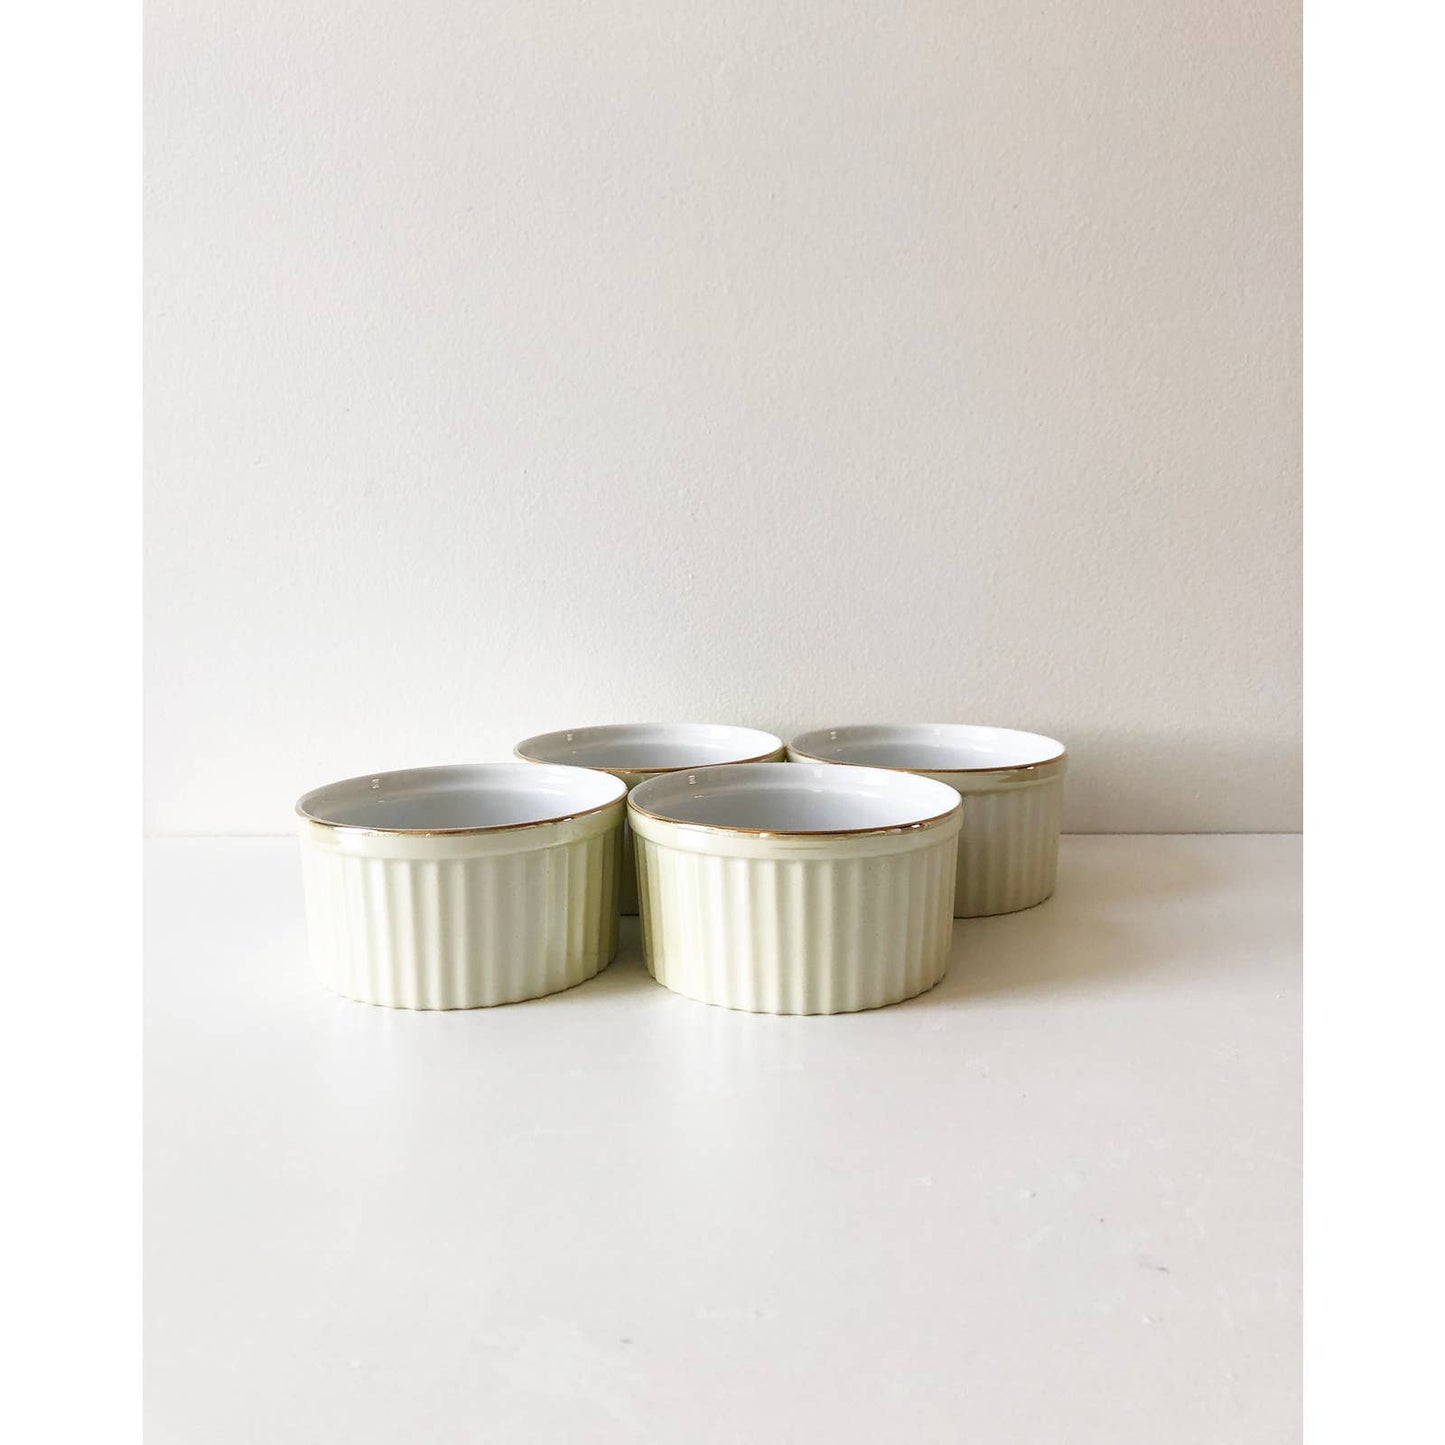 Four French Vintage White Cream Porcelain Ribbed Custard Cups | Metallic and Gold Desert Cups | Japanese Ceramics | William Sonoma